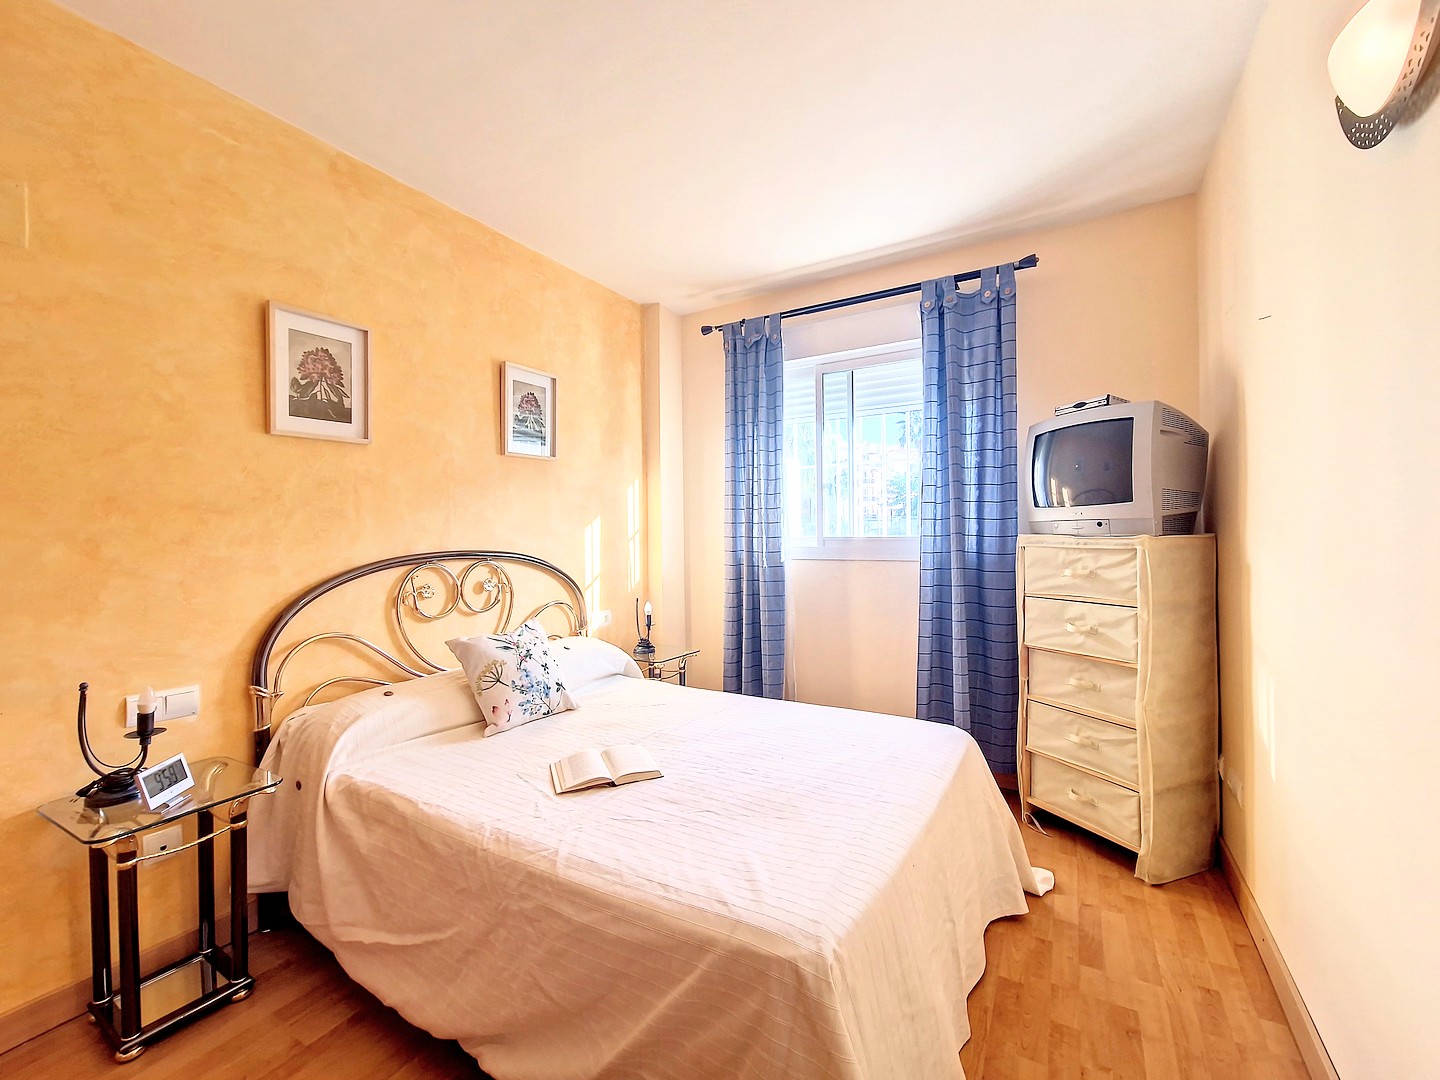 Apartment for sale in Dénia, Les Deveses area